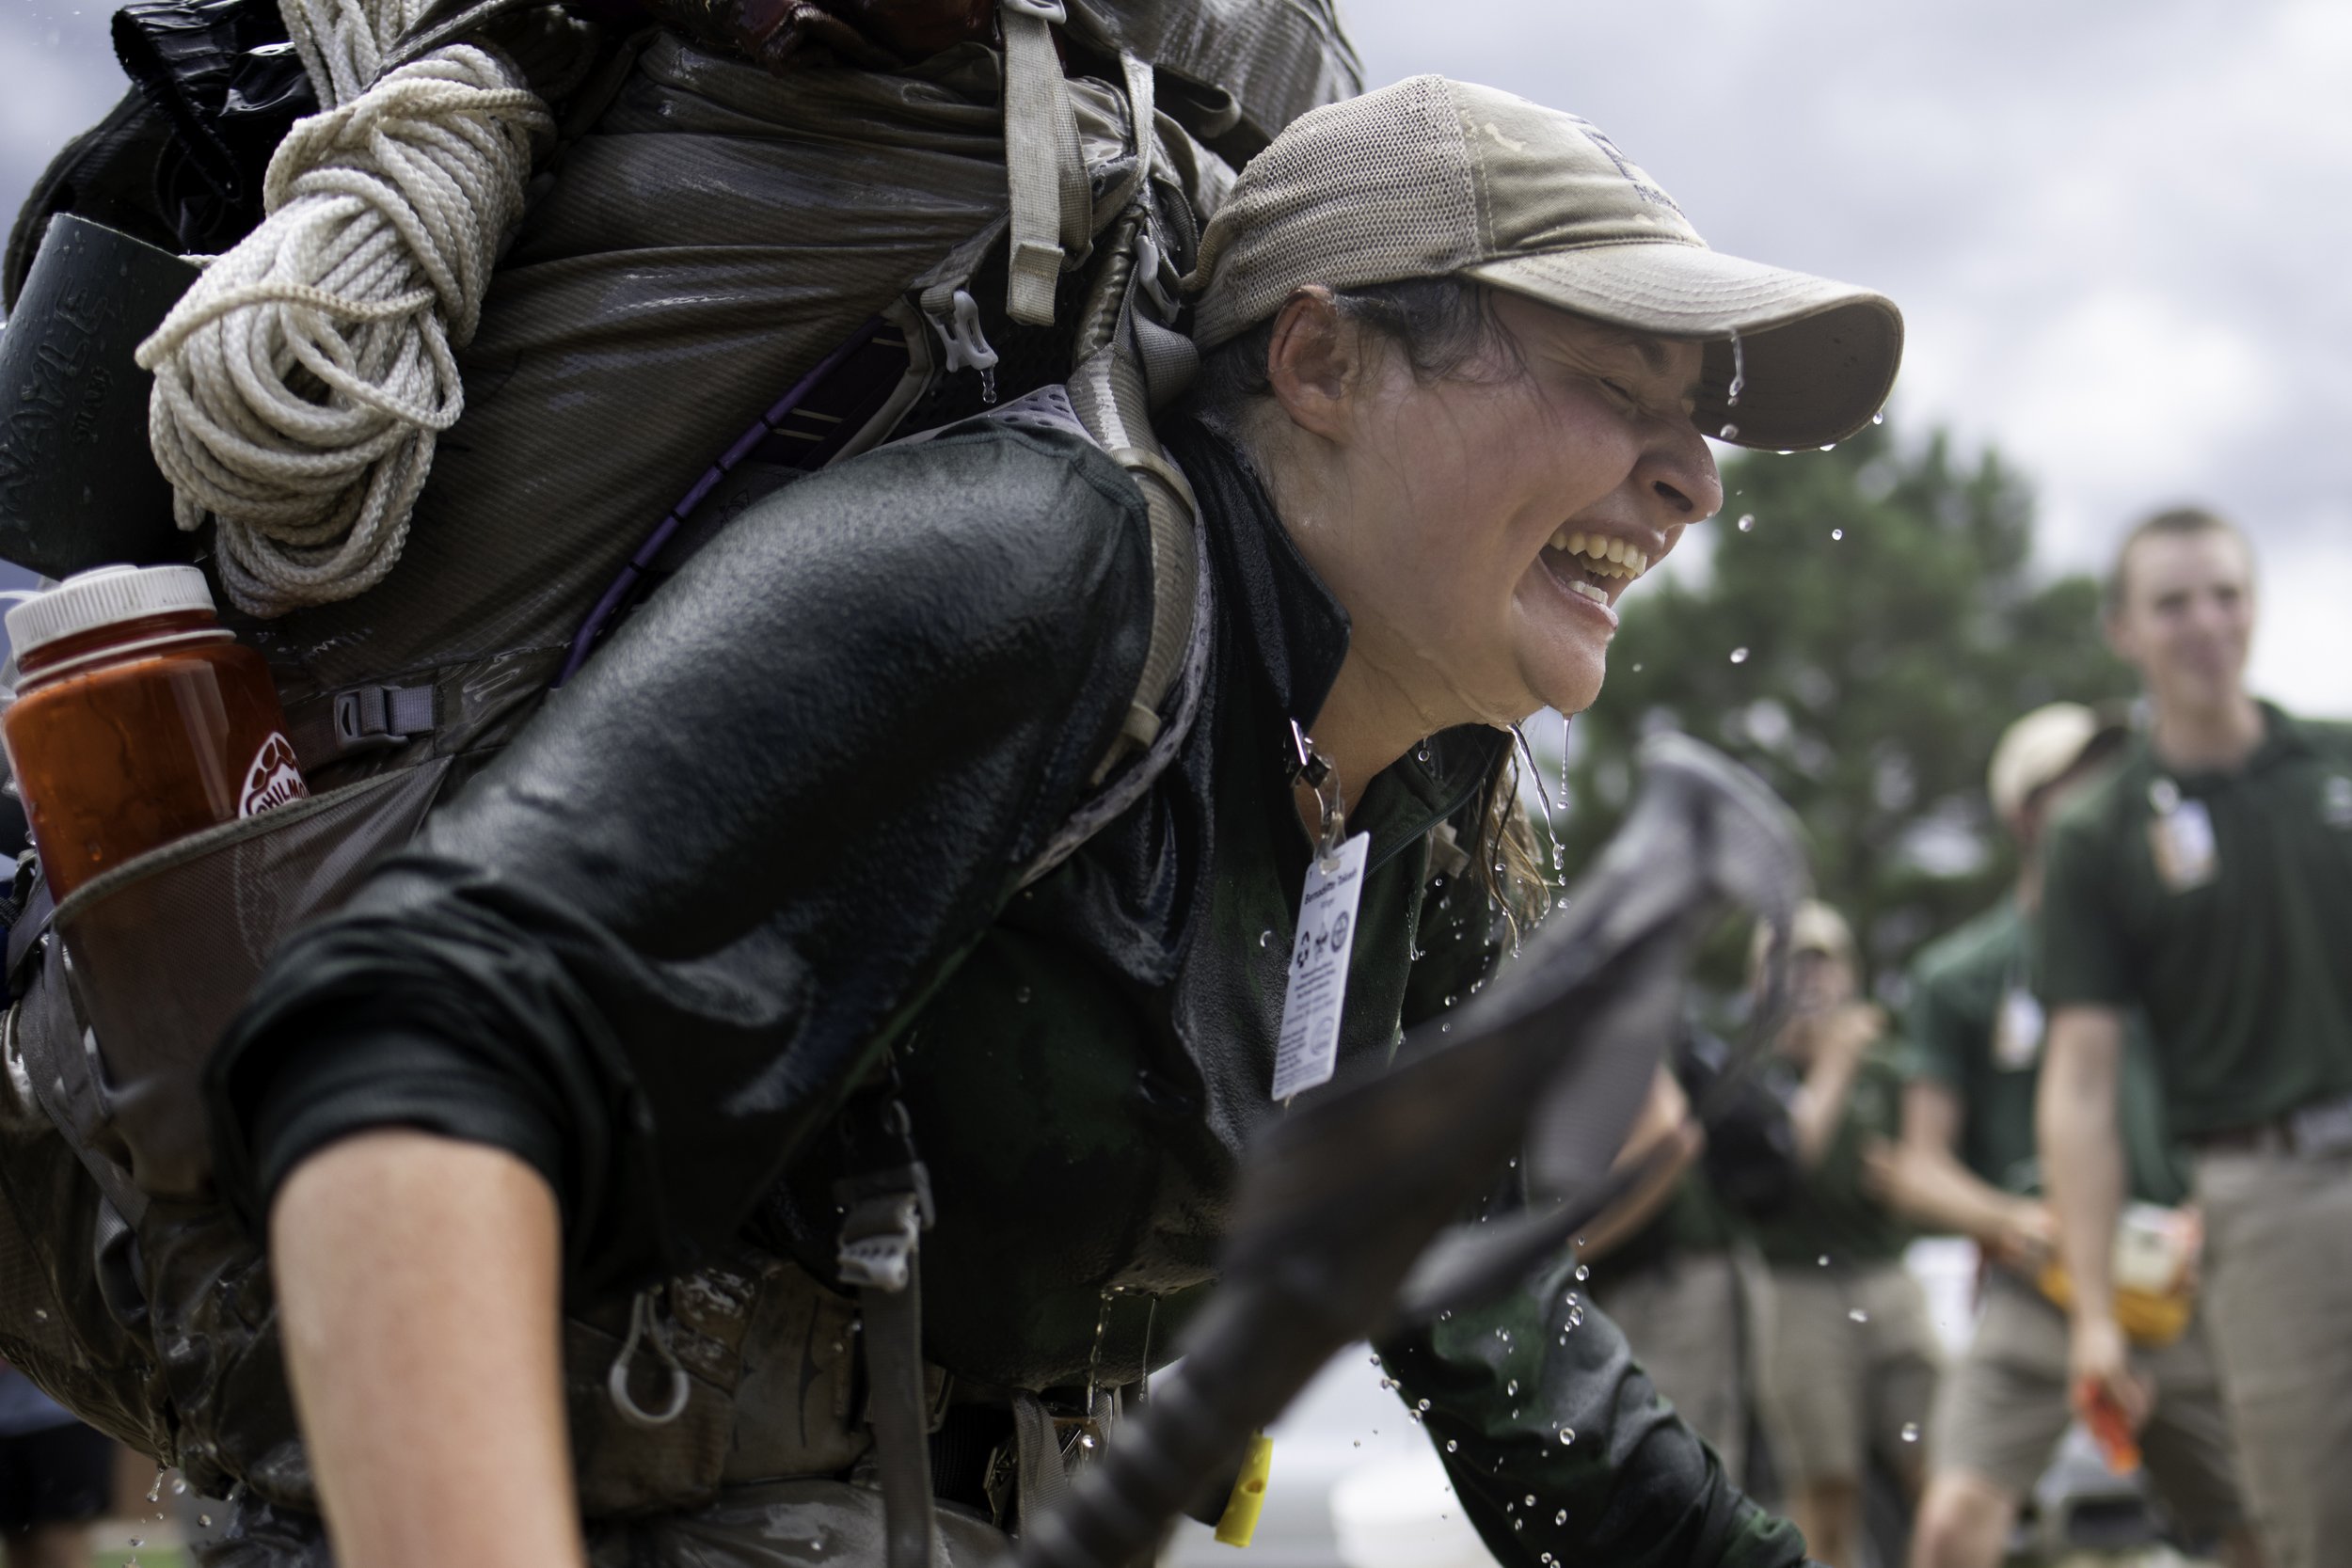  Rayado ranger, Bernadette Takash, runs back into base camp after getting drenched by close friends at Philmont Scout Ranch on July 9, 2022 in Cimarron, N.M.  